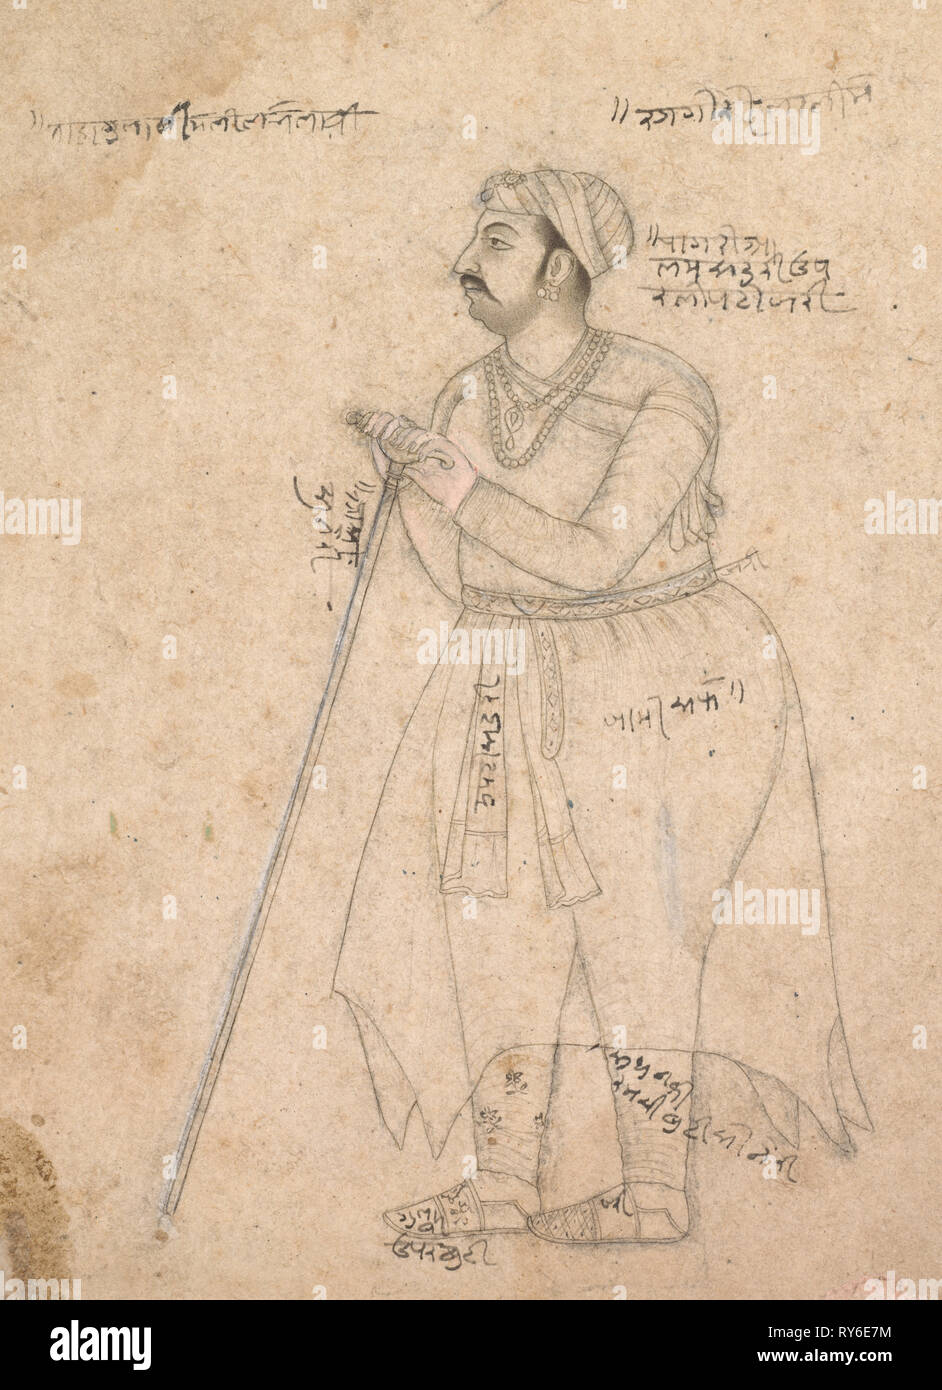 Portrait of Maharaja Rai Singh of Bikaner (reigned 1571-1612), 1605-10. Nur Muhammad (Indian, active c. 1580-1630). Ink and opaque pigment on paper; image: 20.5 x 14.6 cm (8 1/16 x 5 3/4 in.); paper: 42.4 x 26 cm (16 11/16 x 10 1/4 in Stock Photo